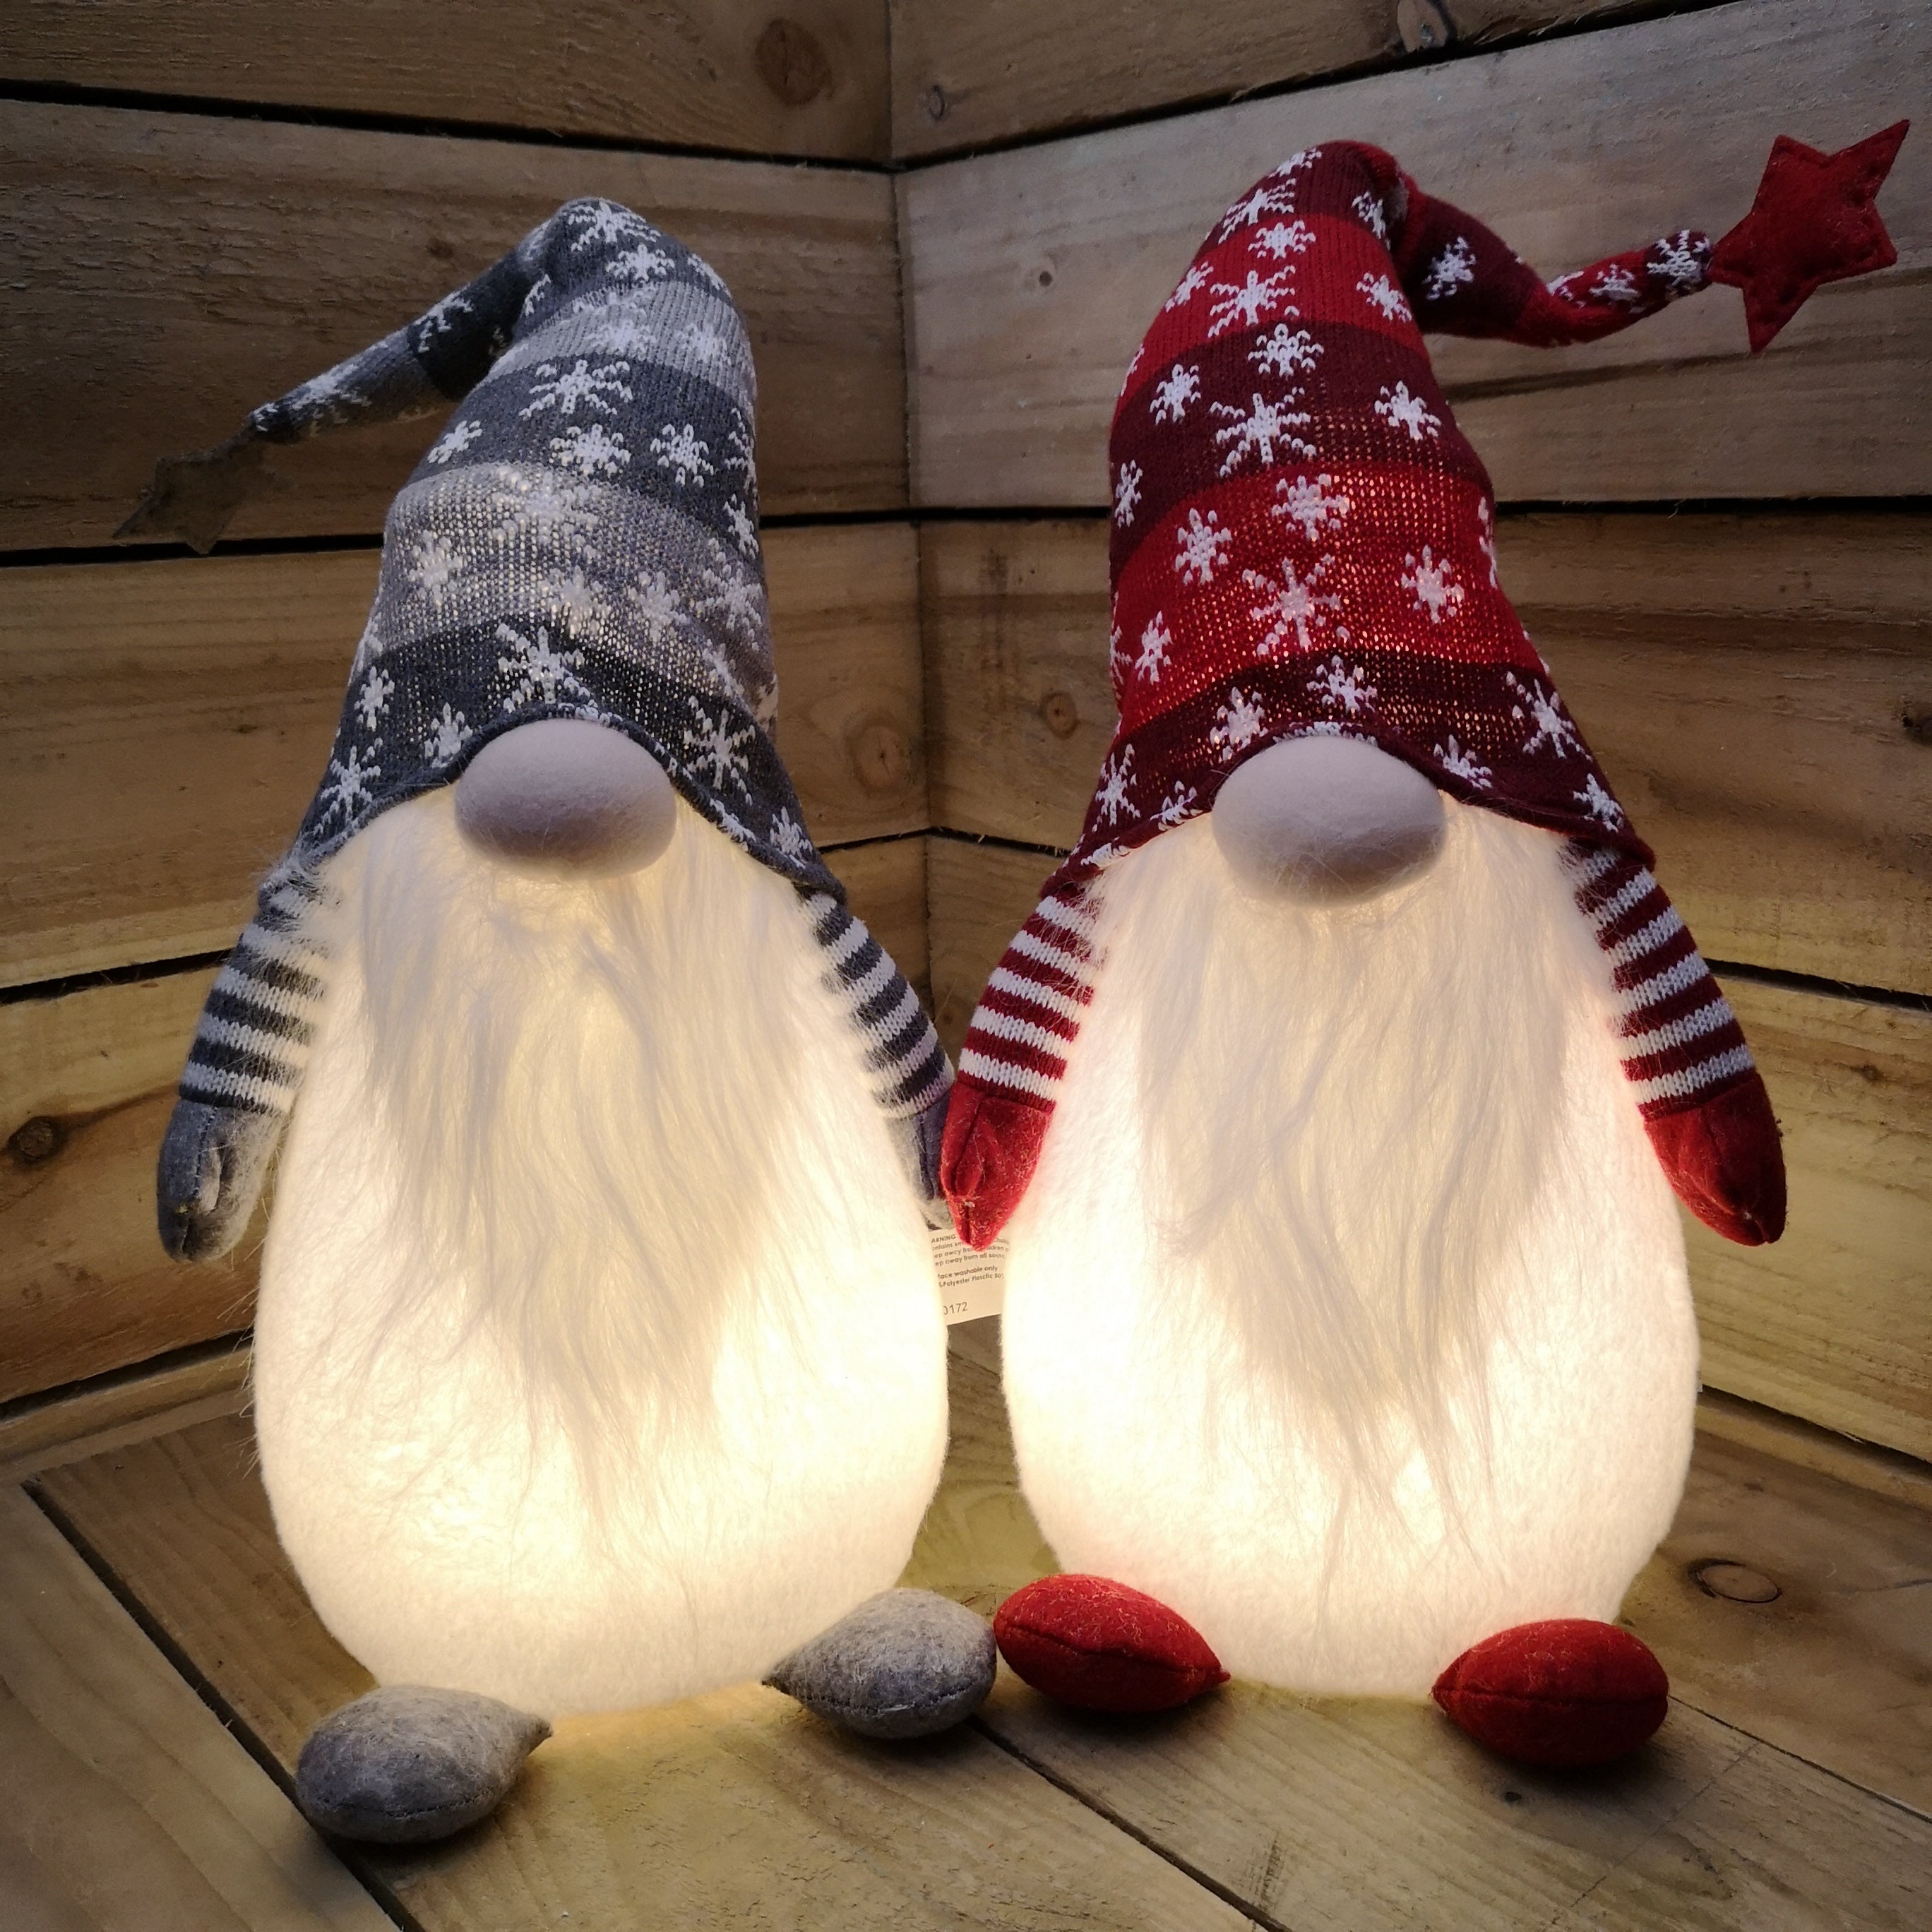 66cm Tall Light Up Christmas Gnome Gonk Snowflake Hat Choose From Red or Grey